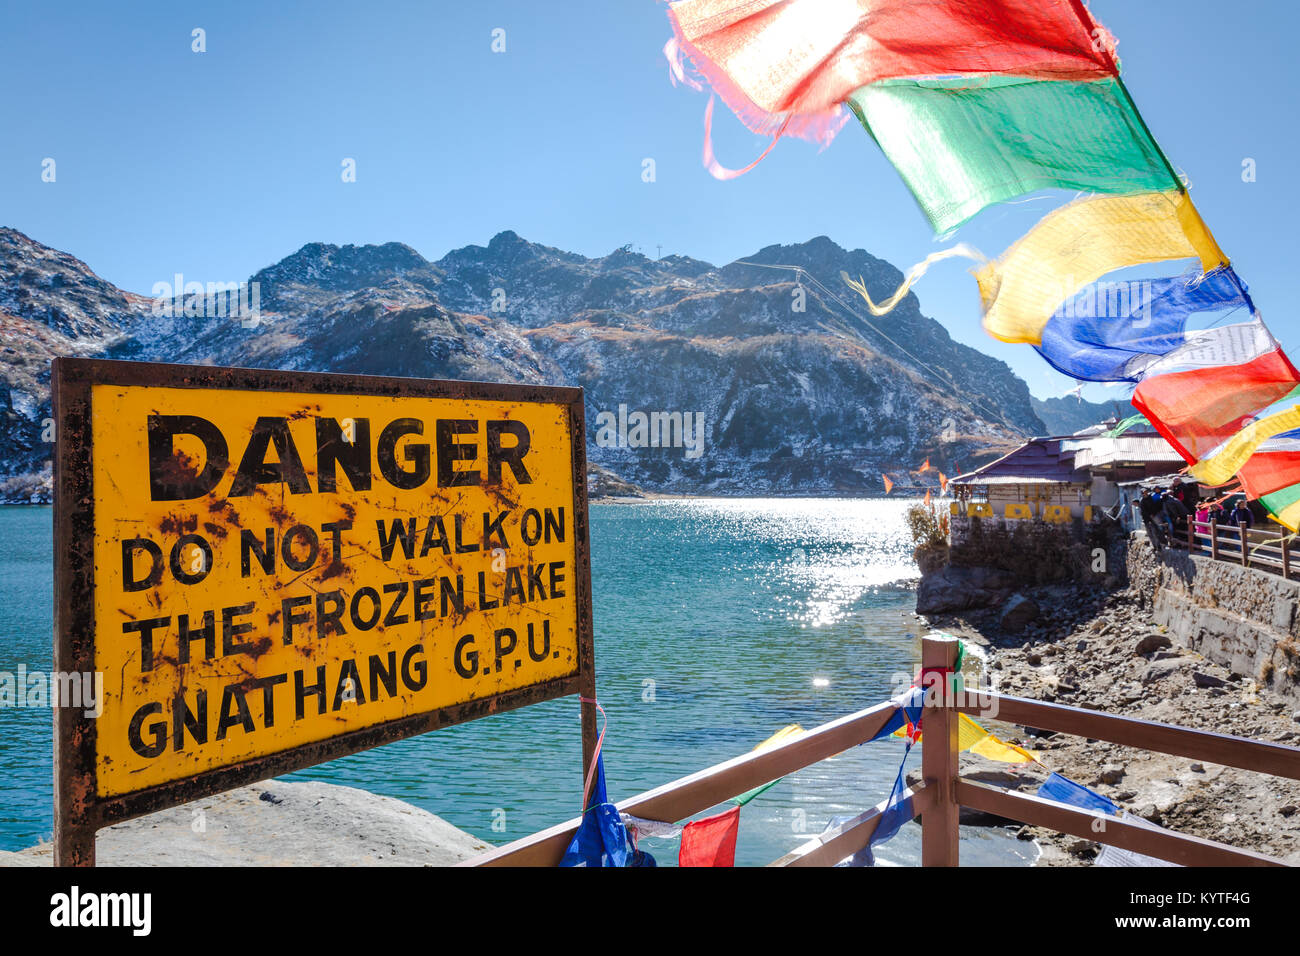 Tsomgo lake / Changu lake near Gangtok city in East Sikkim, North east India. Beautiful Buddhist prayer flags flutter and danger sign board in front Stock Photo